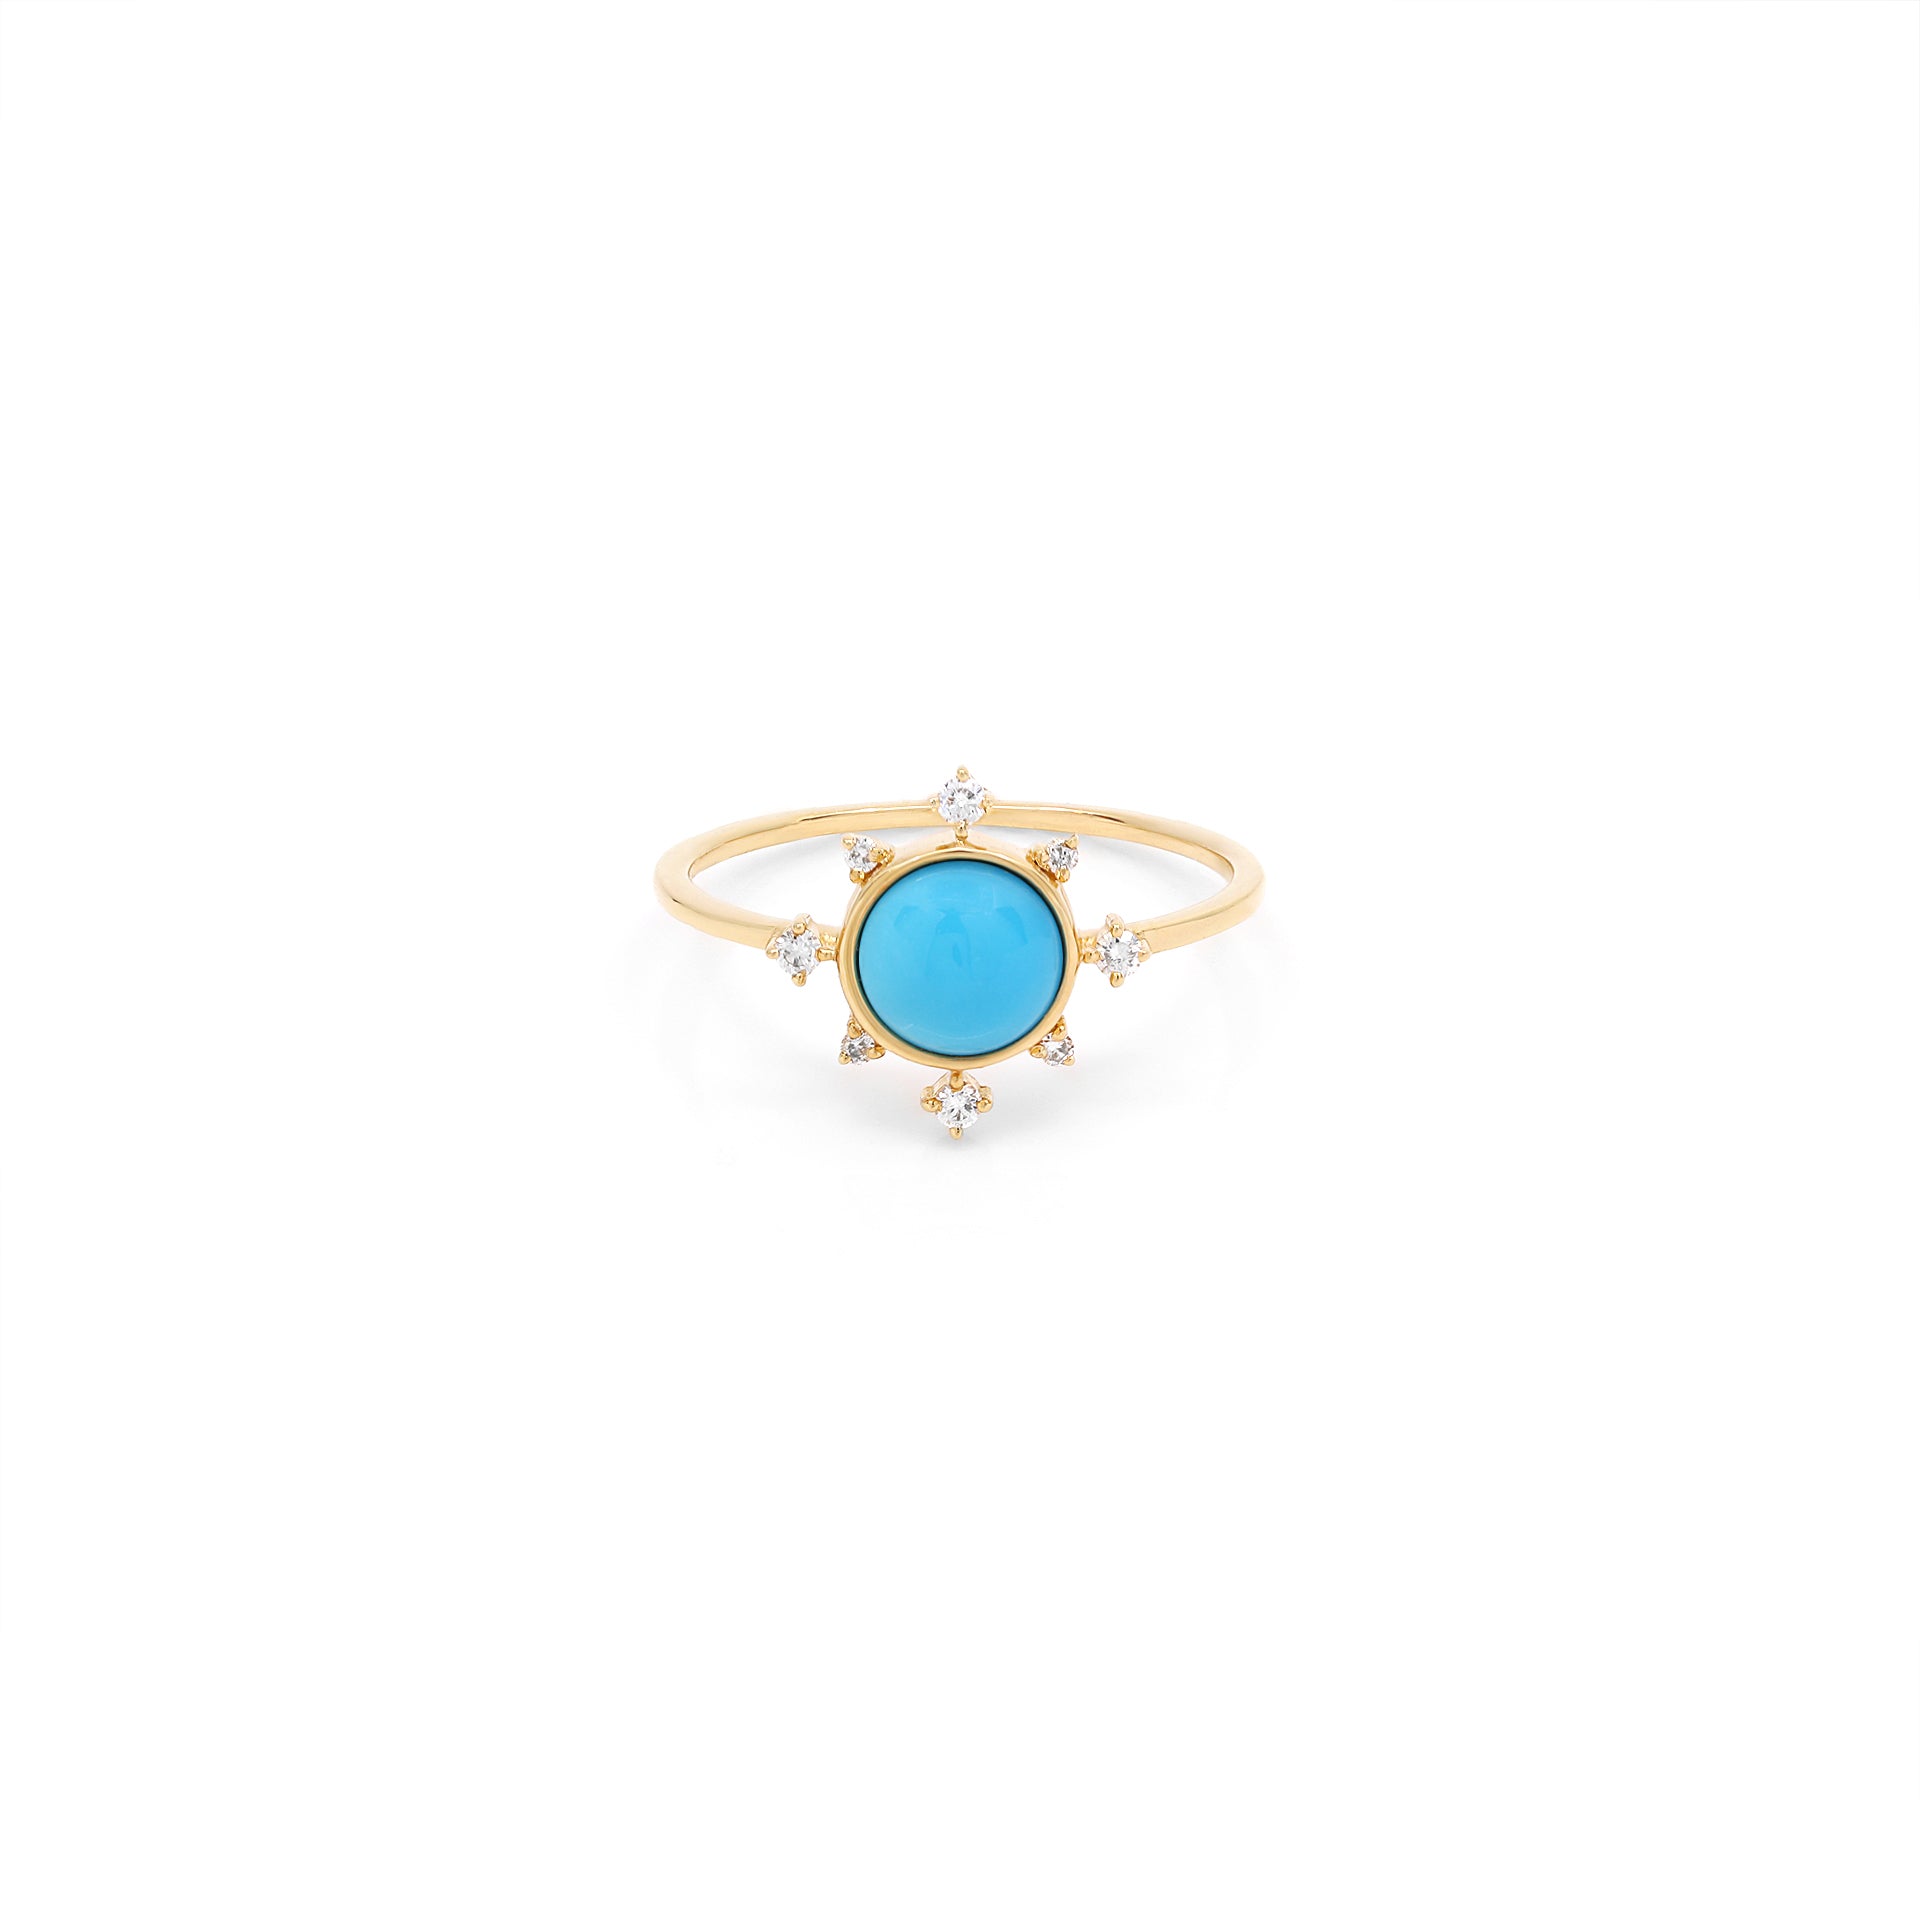 Melati Rise ring in Yellow Gold with Turquoise and diamonds